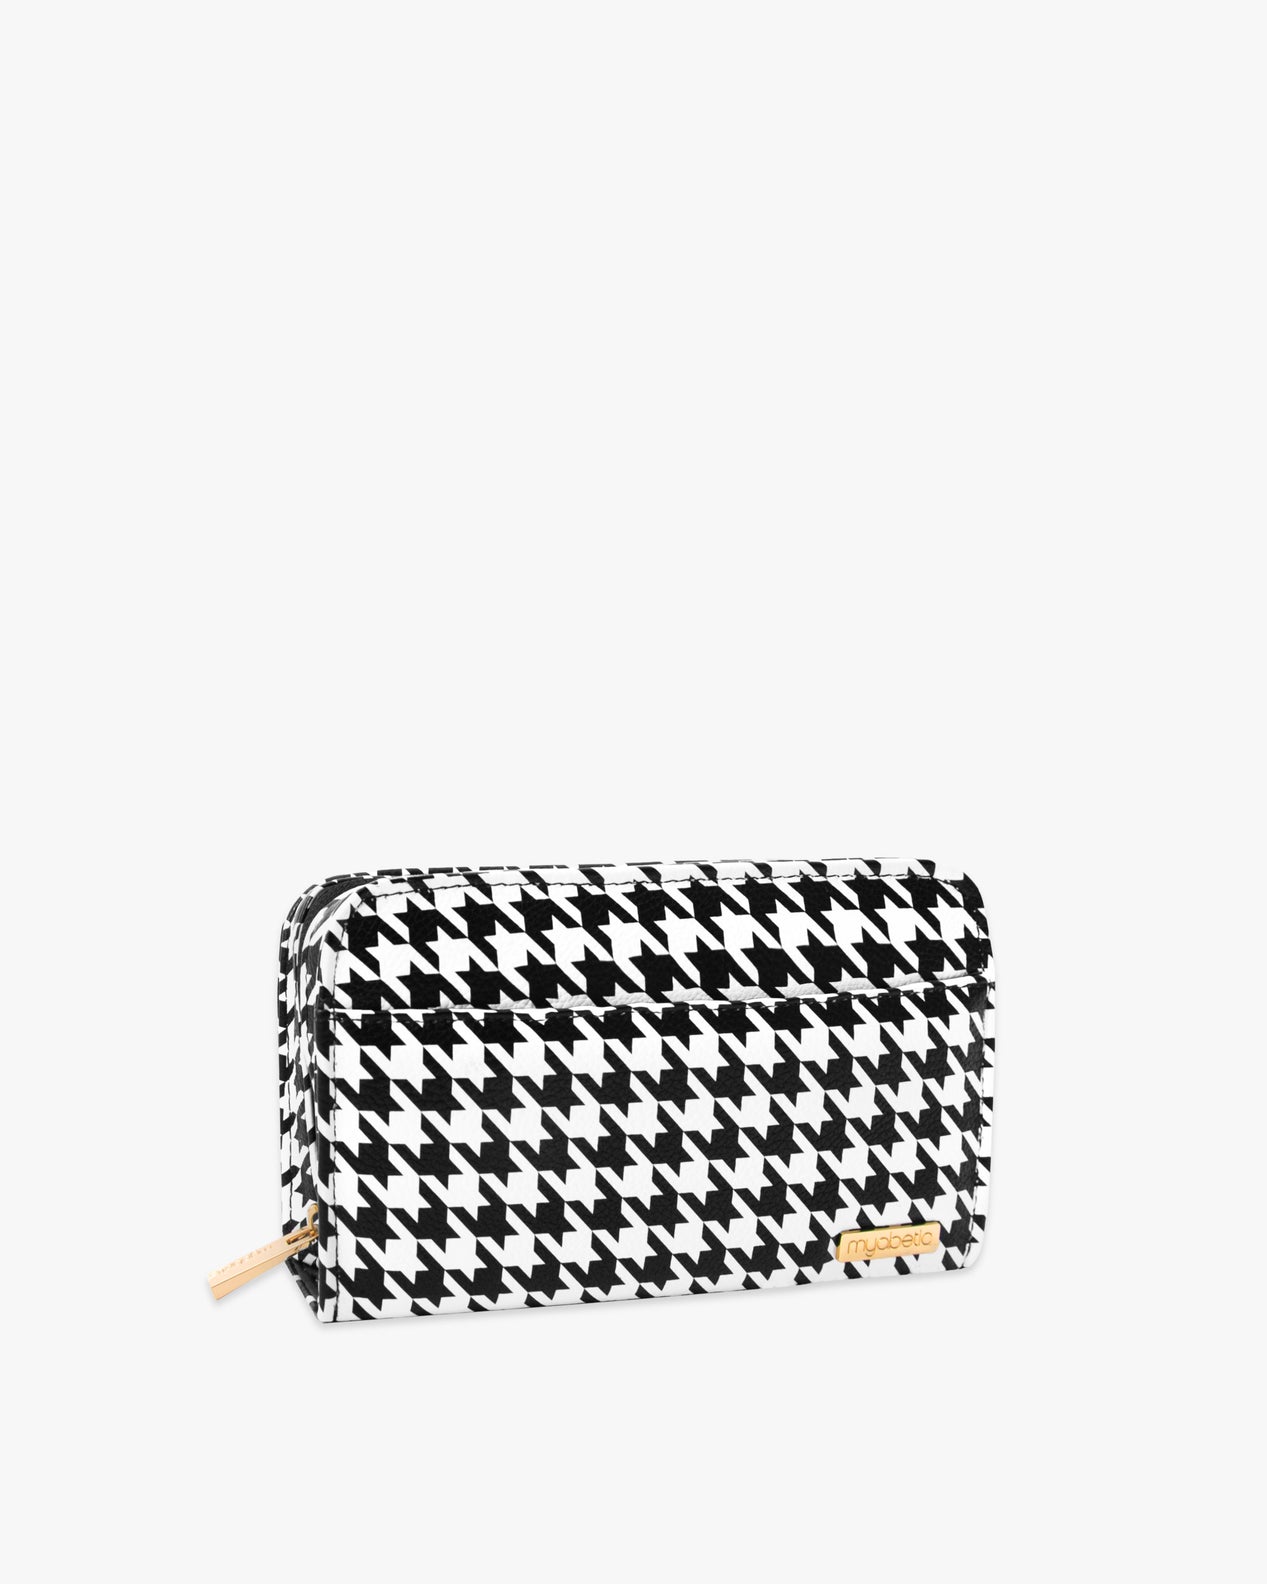 color:houndstooth